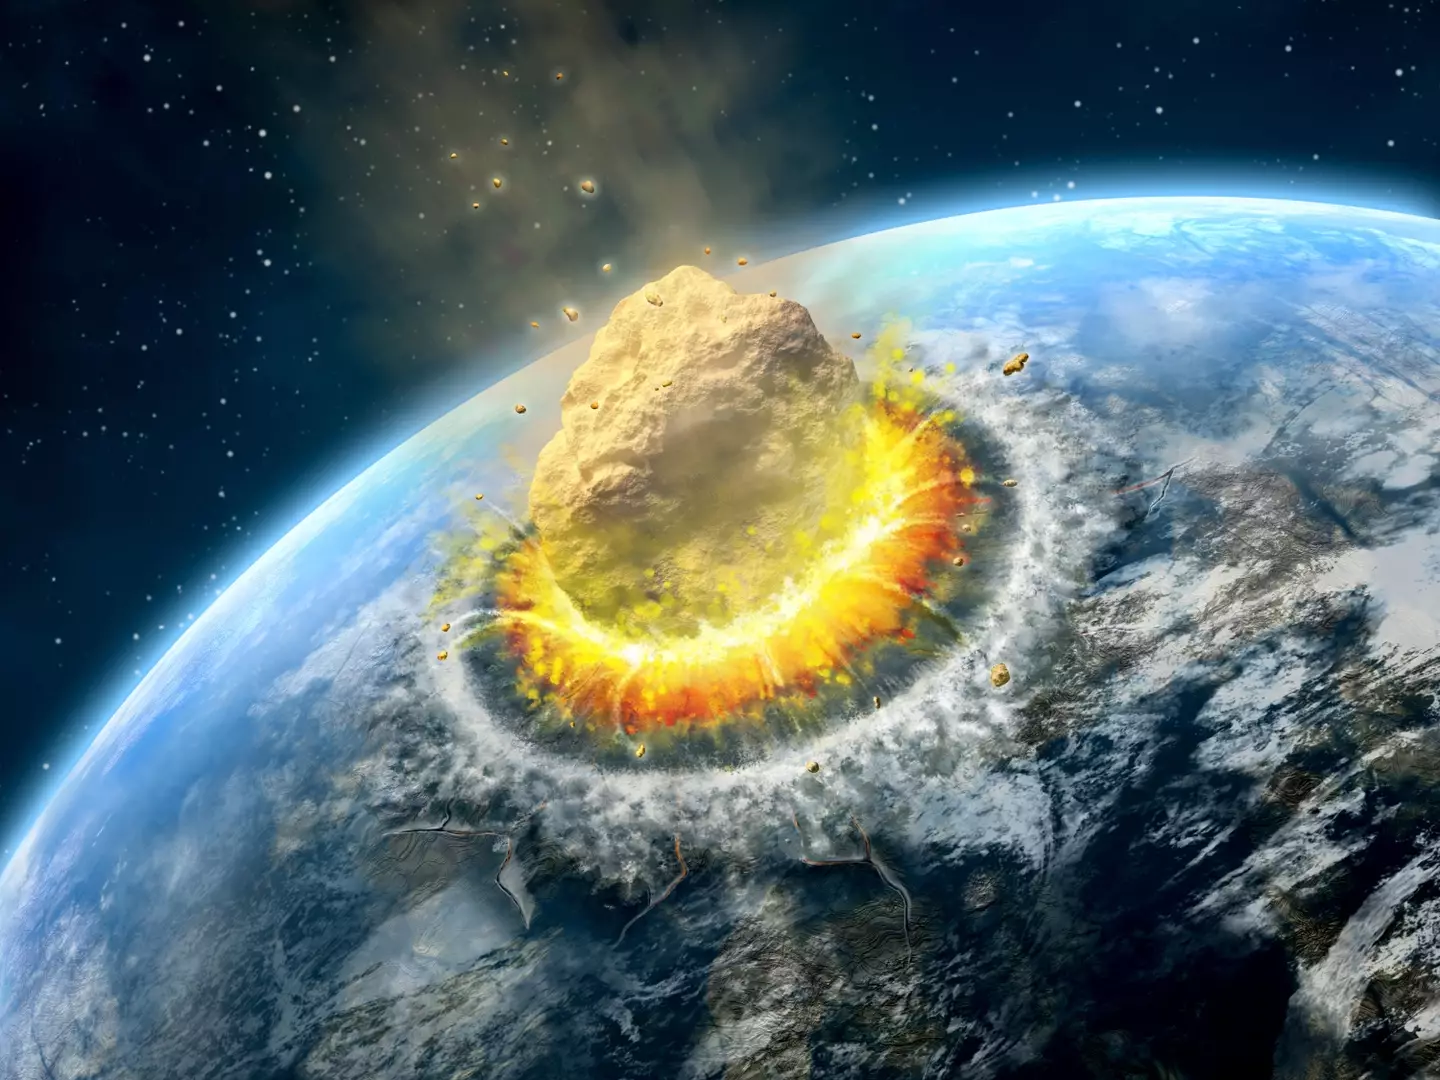 The mission is hoped to stop asteroids hitting Earth in the future.